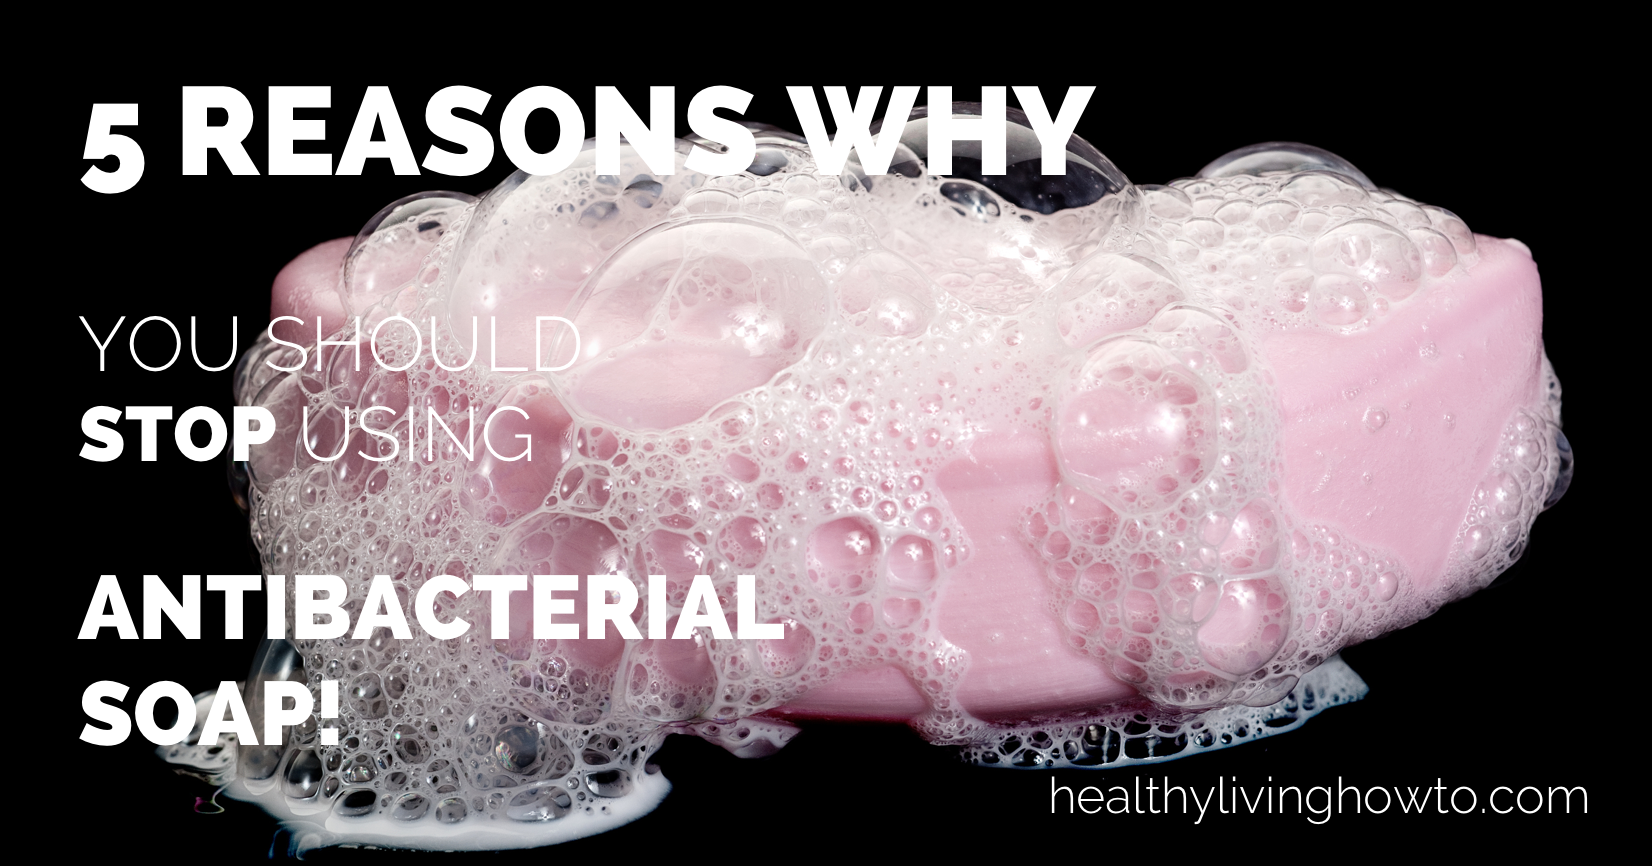 5 Reasons Why You Should Stop Using Antibacterial Soap | healthylivinghowto.com